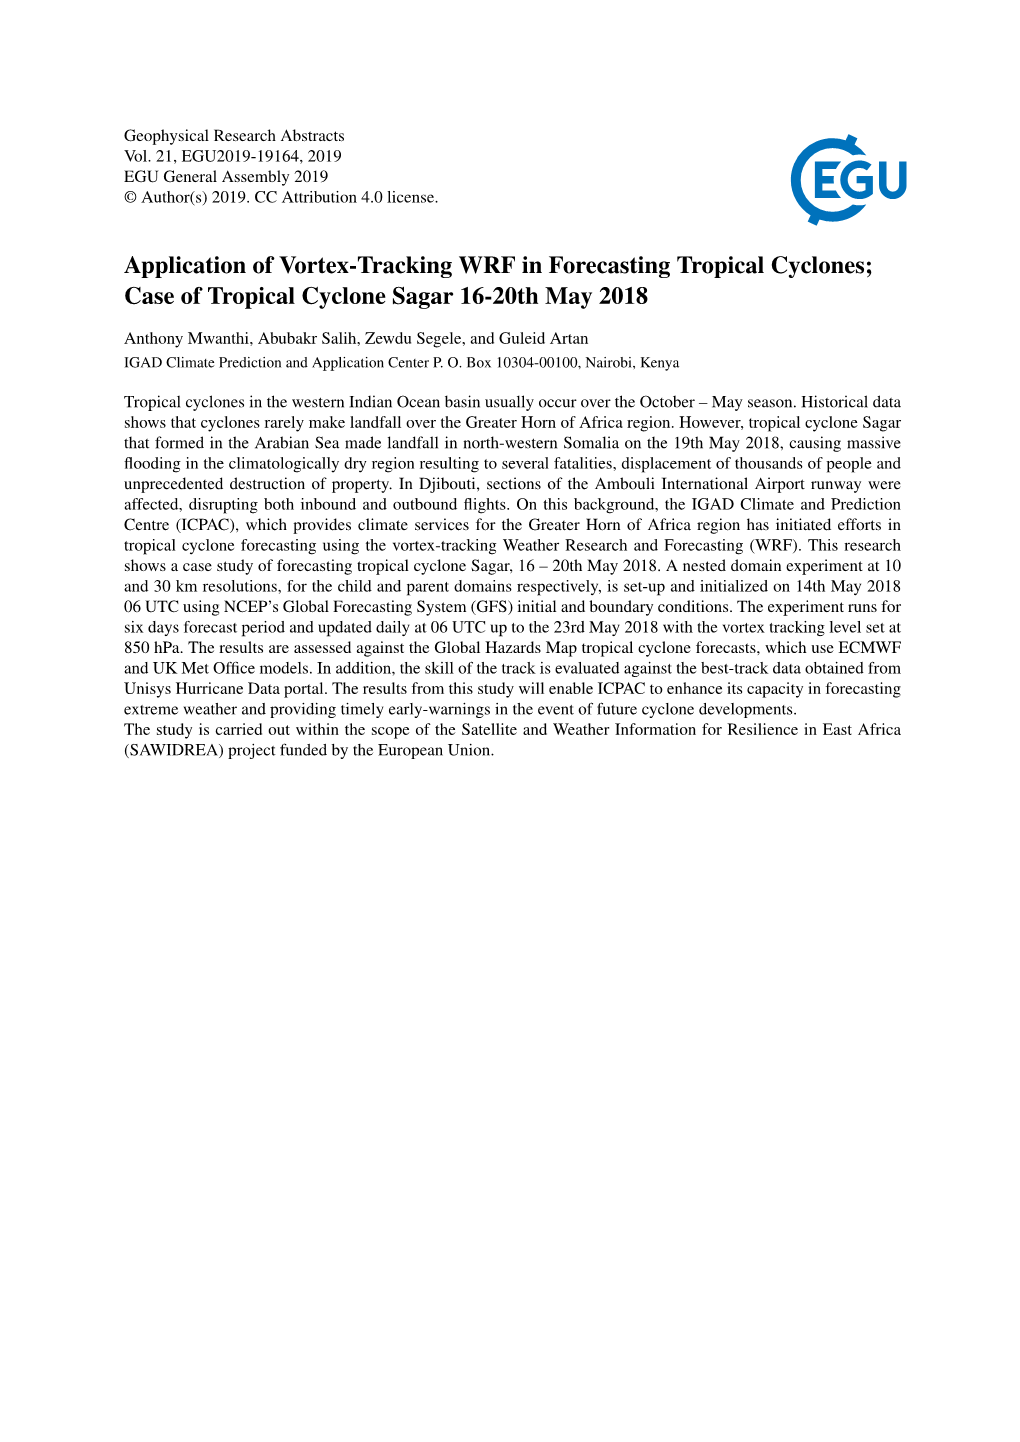 Application of Vortex-Tracking WRF in Forecasting Tropical Cyclones; Case of Tropical Cyclone Sagar 16-20Th May 2018